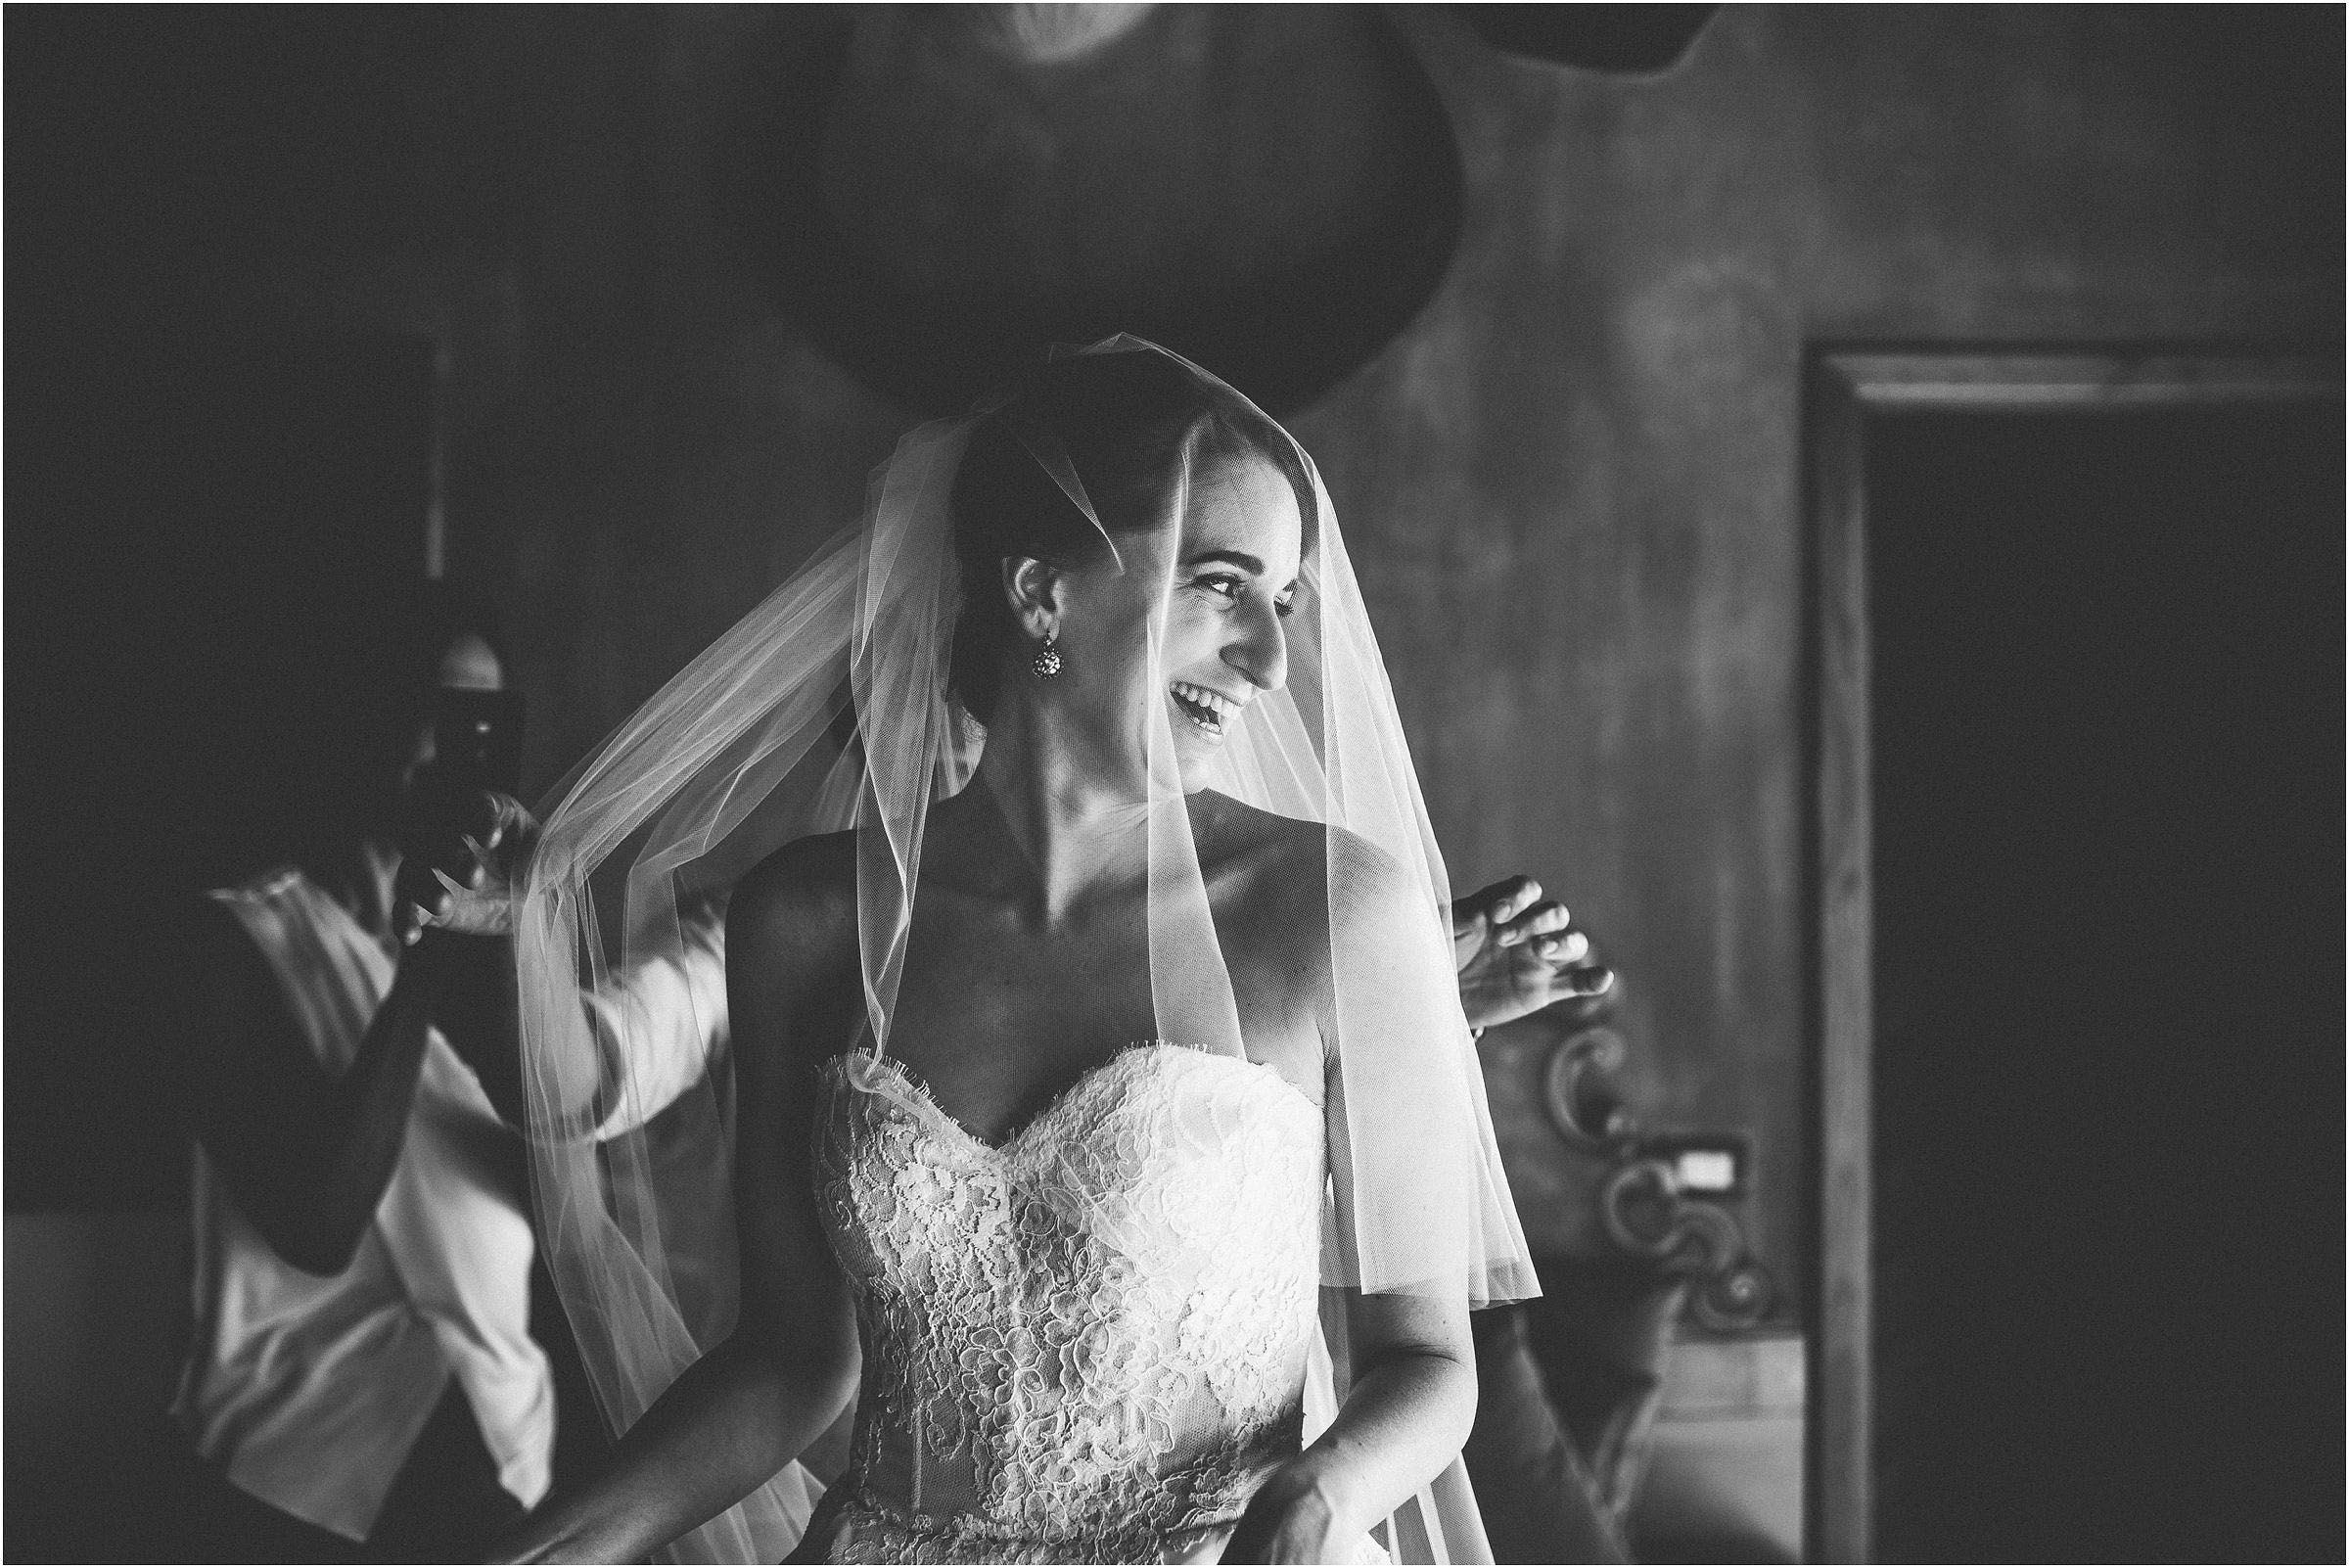 A smiling bride prepares to get married at Castello di Vicarello in Tuscany